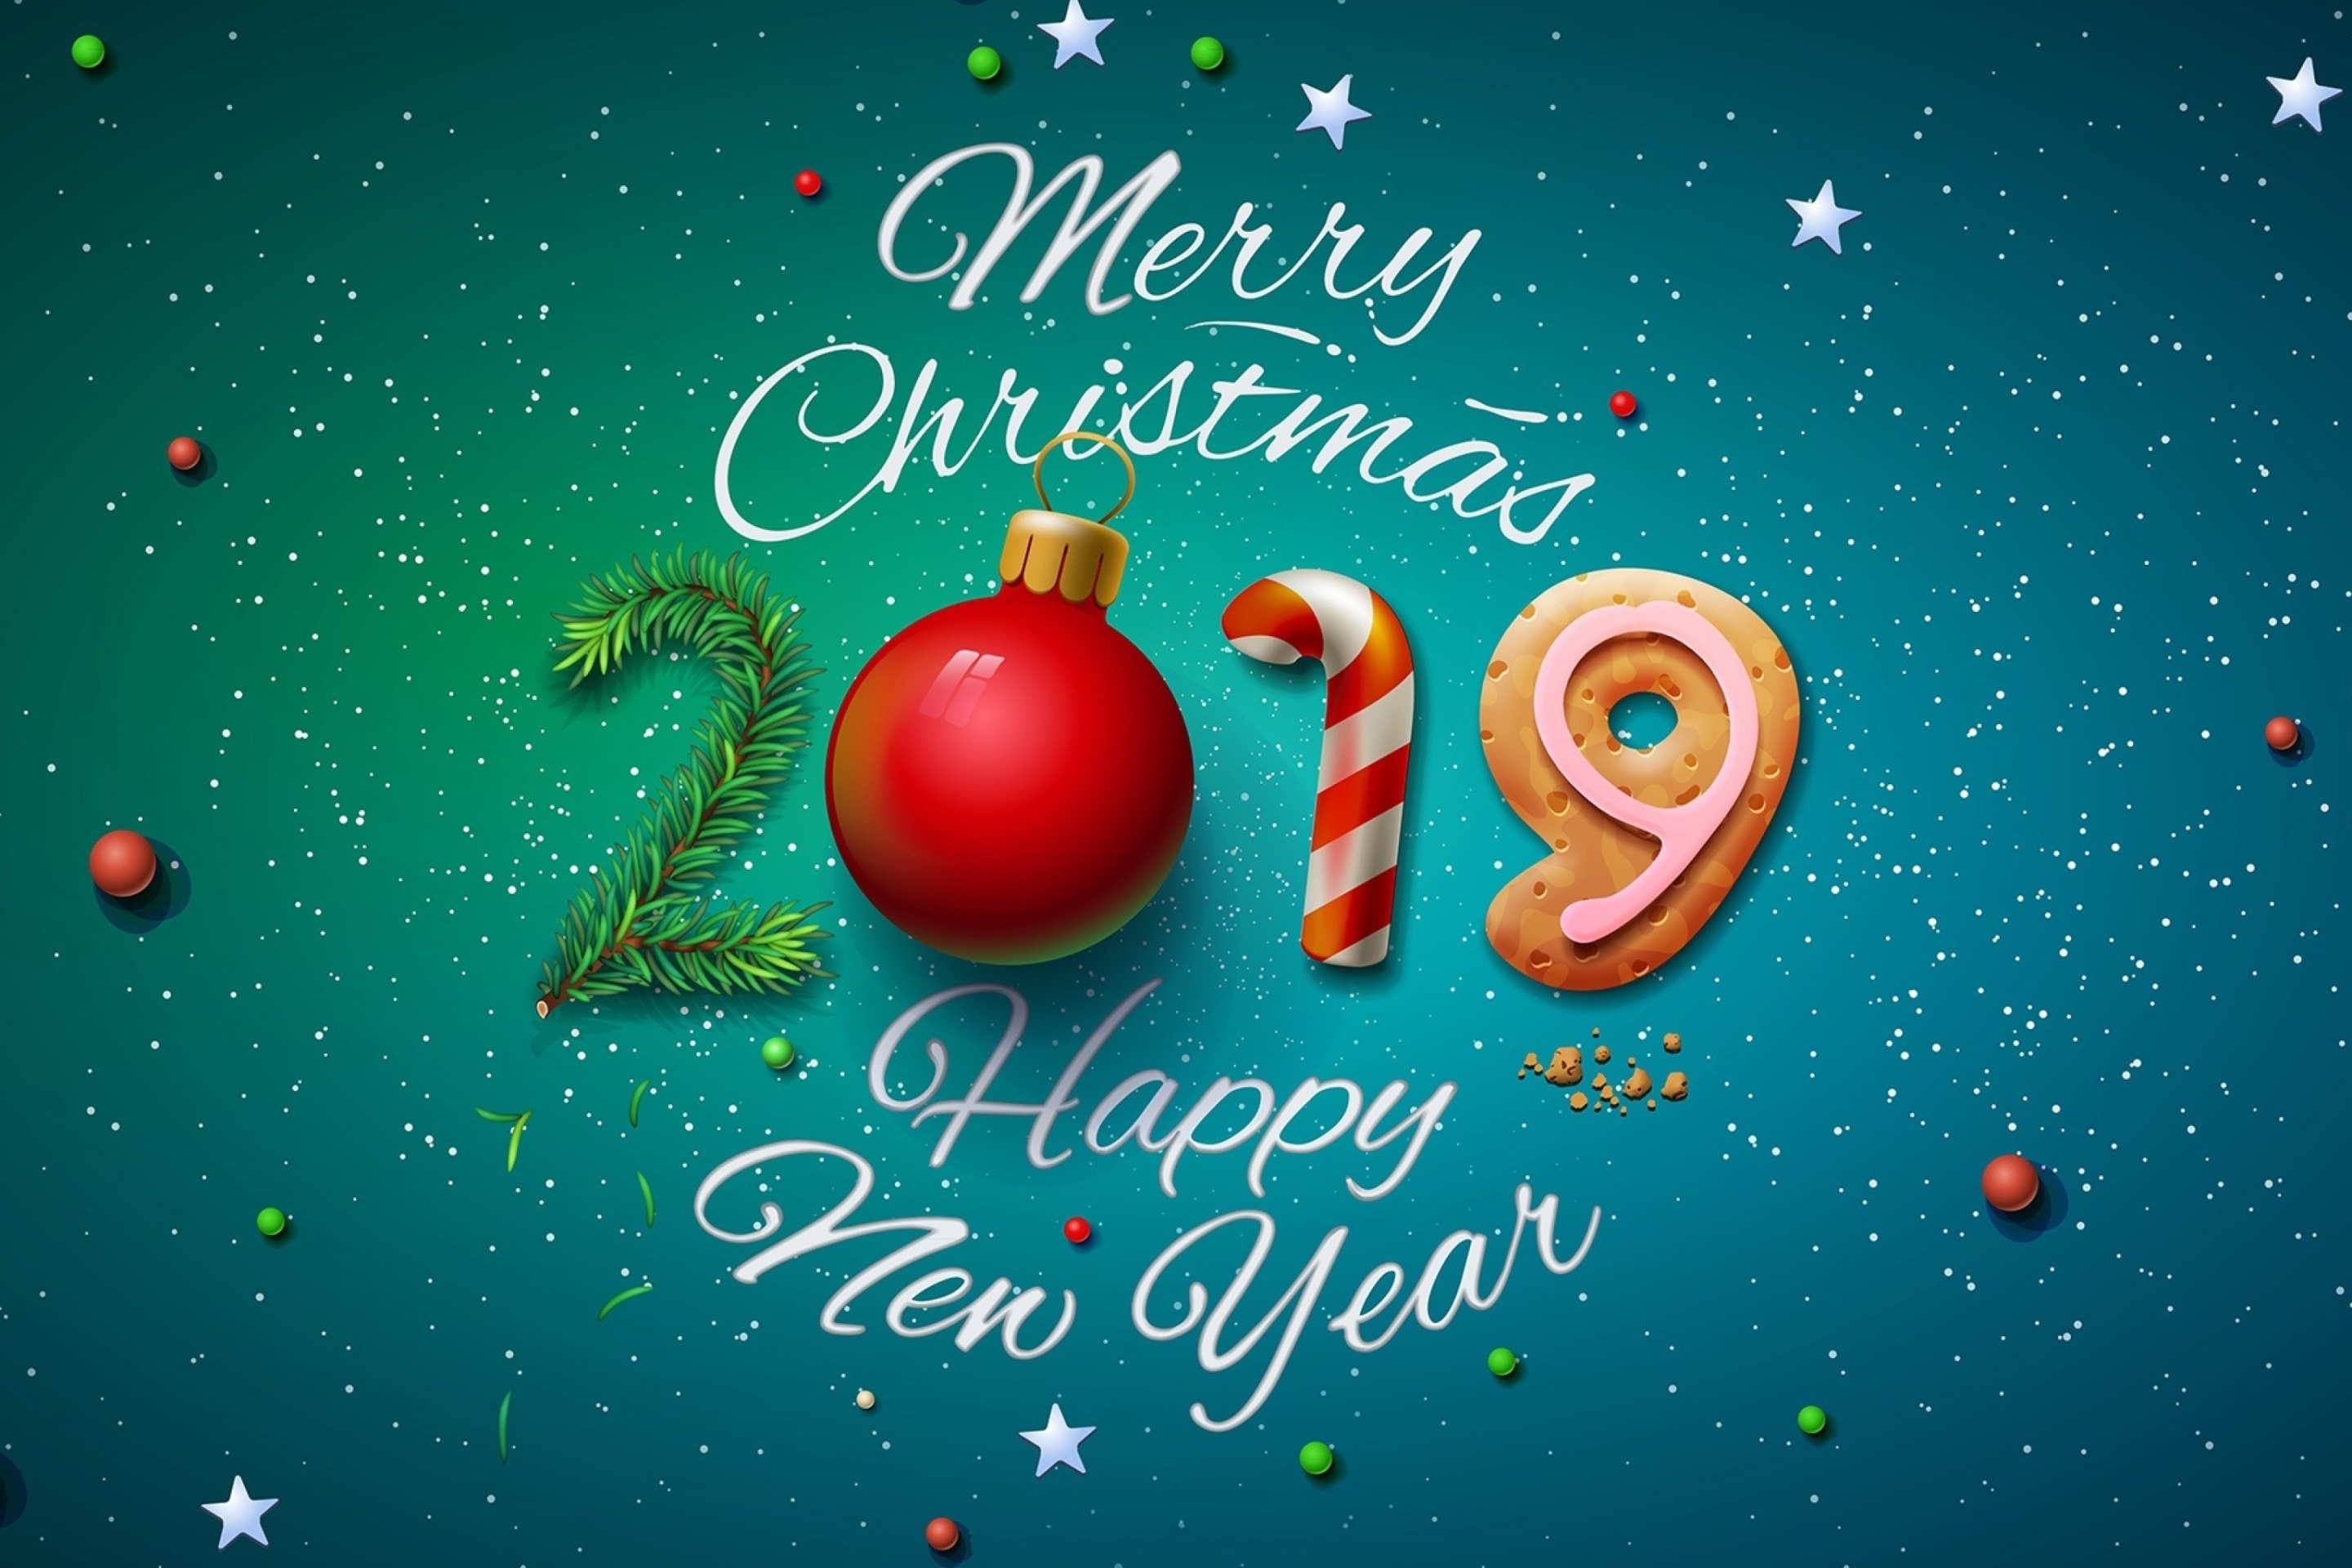 Merry Christmas and Happy New Year 2019 wallpaper 2880x1920